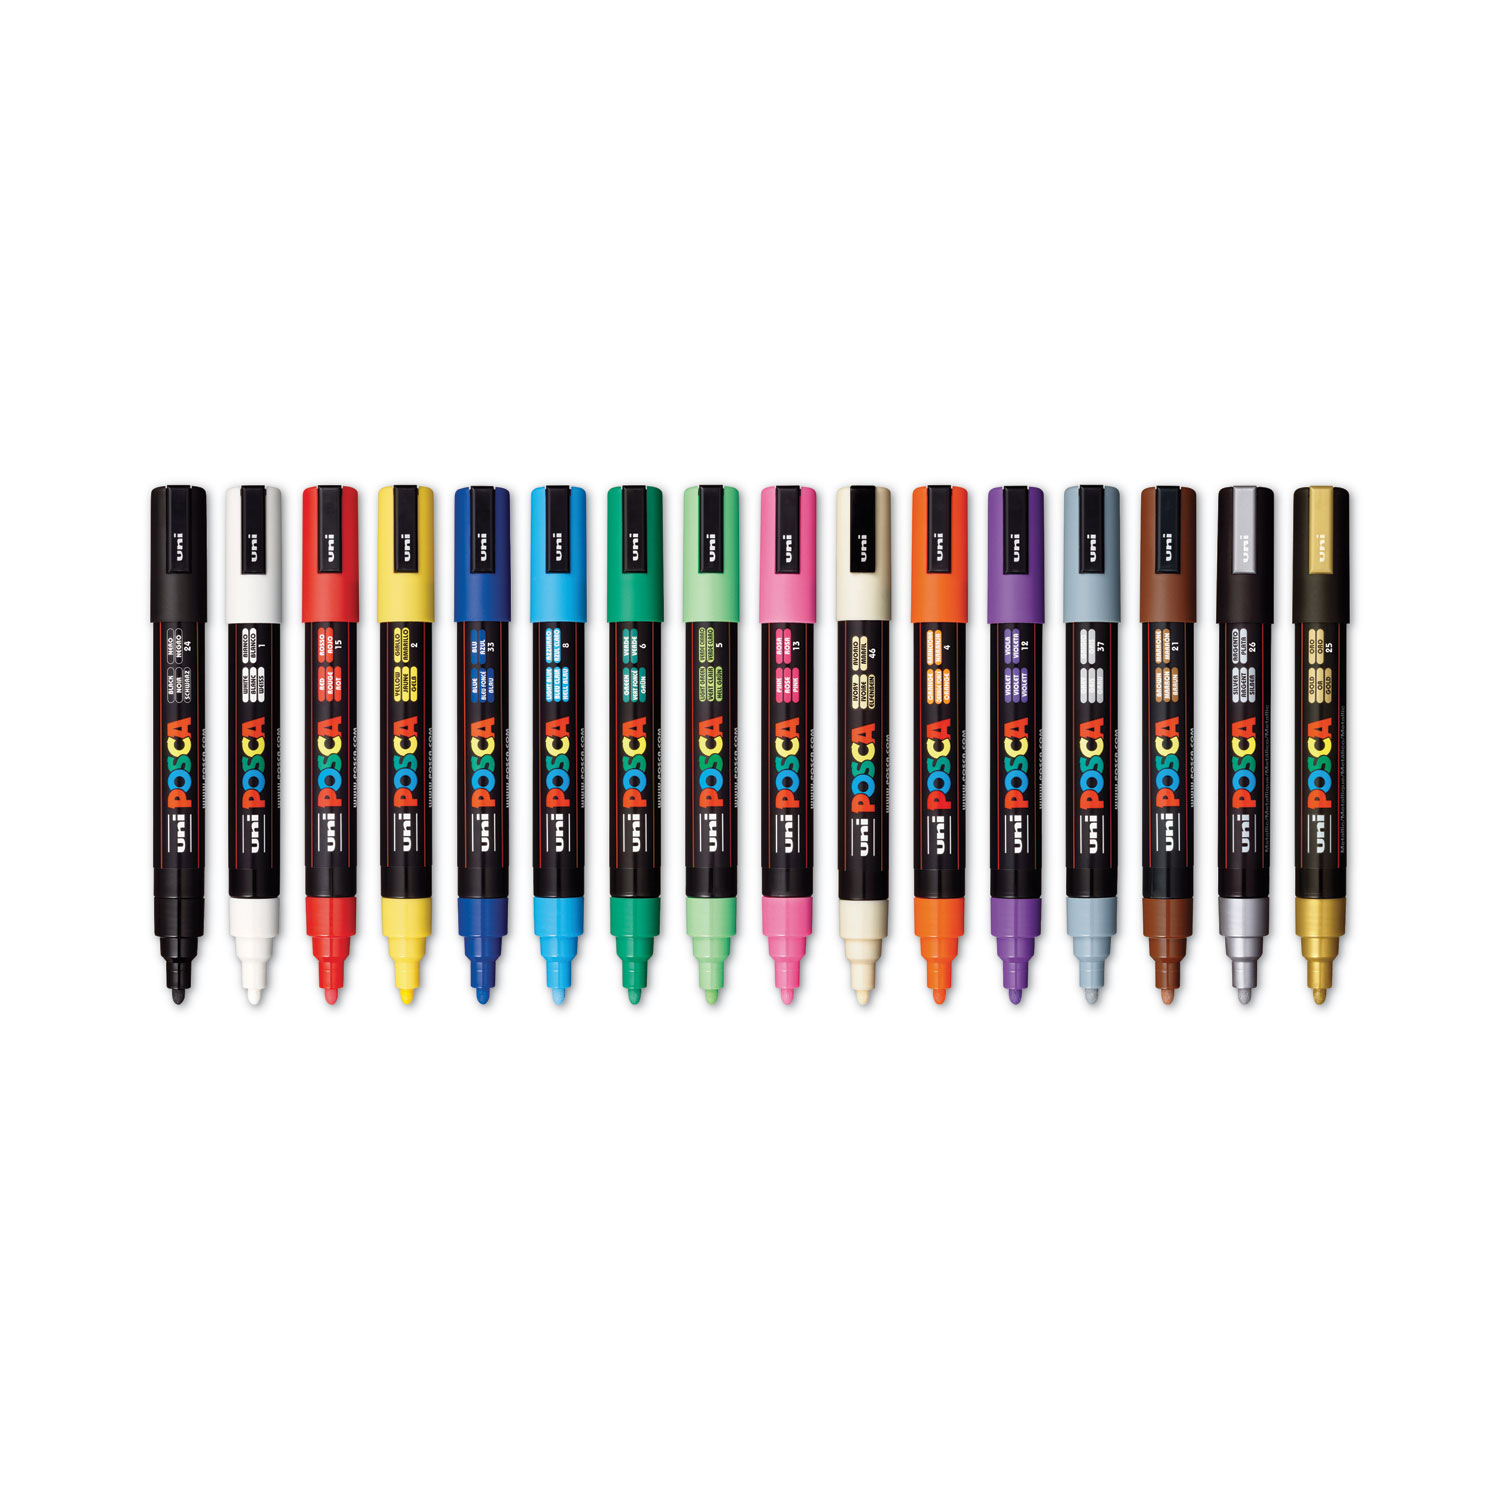 Permanent Specialty Marker, Medium Bullet Tip, Assorted Colors, 16/Pack